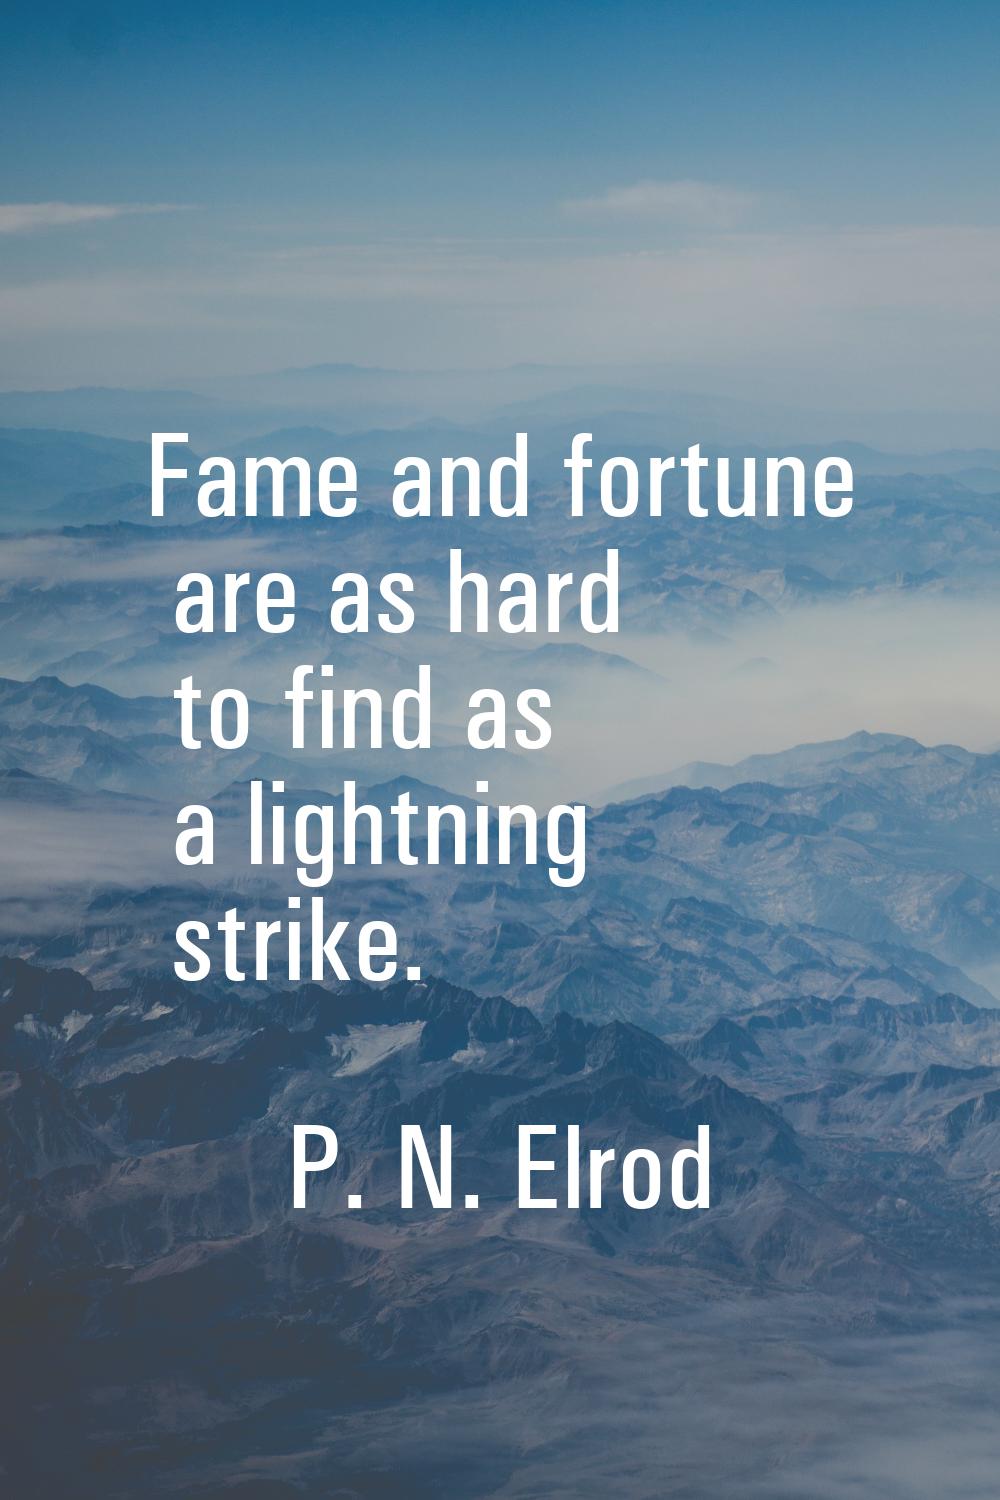 Fame and fortune are as hard to find as a lightning strike.